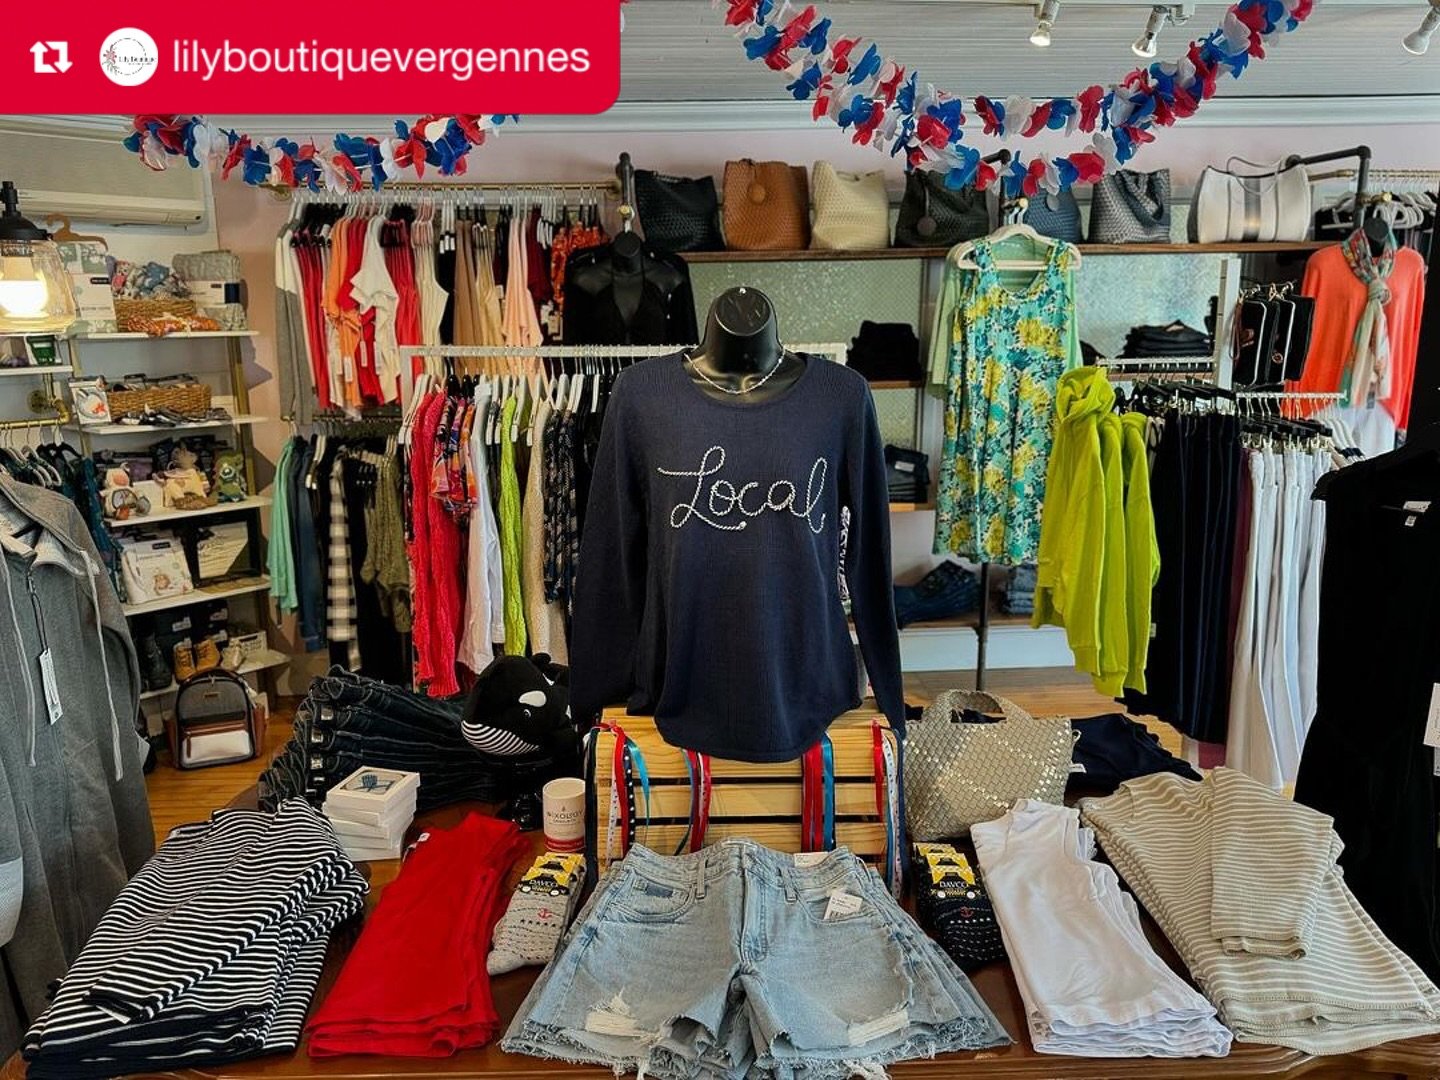 @lilyboutiquevergennes has it going on the patriotic fashion front. Pop in today &amp; plan on joining others at the Memorial Day parade! 🇺🇸

Repost from @lilyboutiquevergennes
&bull;
Feeling patriotic over here with our reds, whites &amp; blues #m